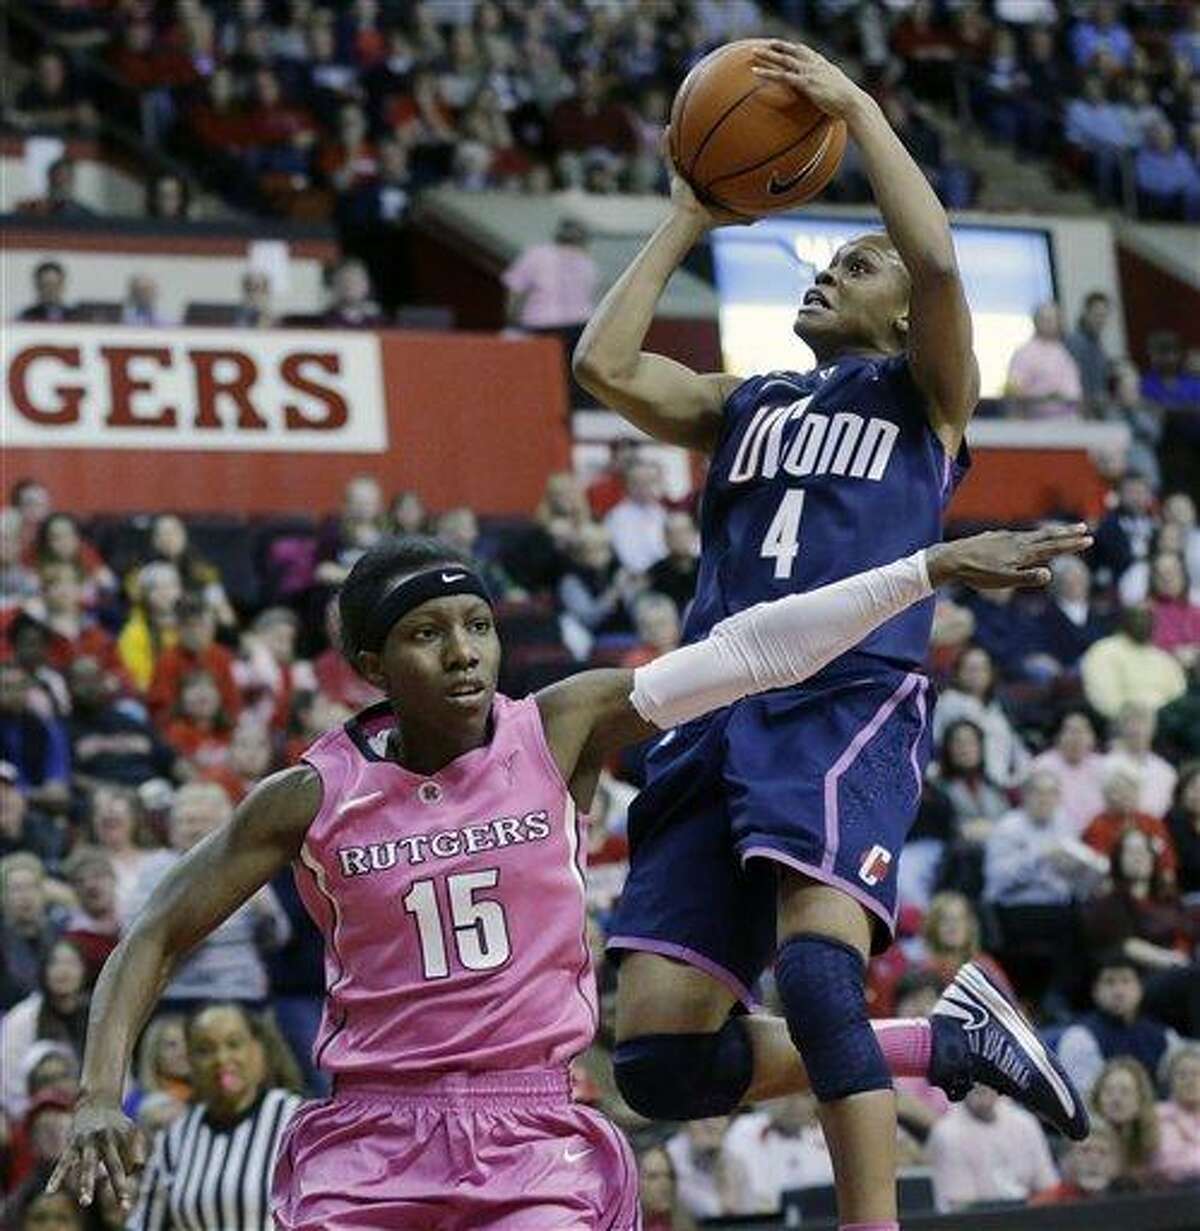 Connecticut's Moriah Jefferson (4) takes a shot over Rutgers' Syessence Davis (15) during the first half of an NCAA college basketball game Saturday, Feb. 16, 2013, in Piscataway, N.J. (AP Photo/Mel Evans)